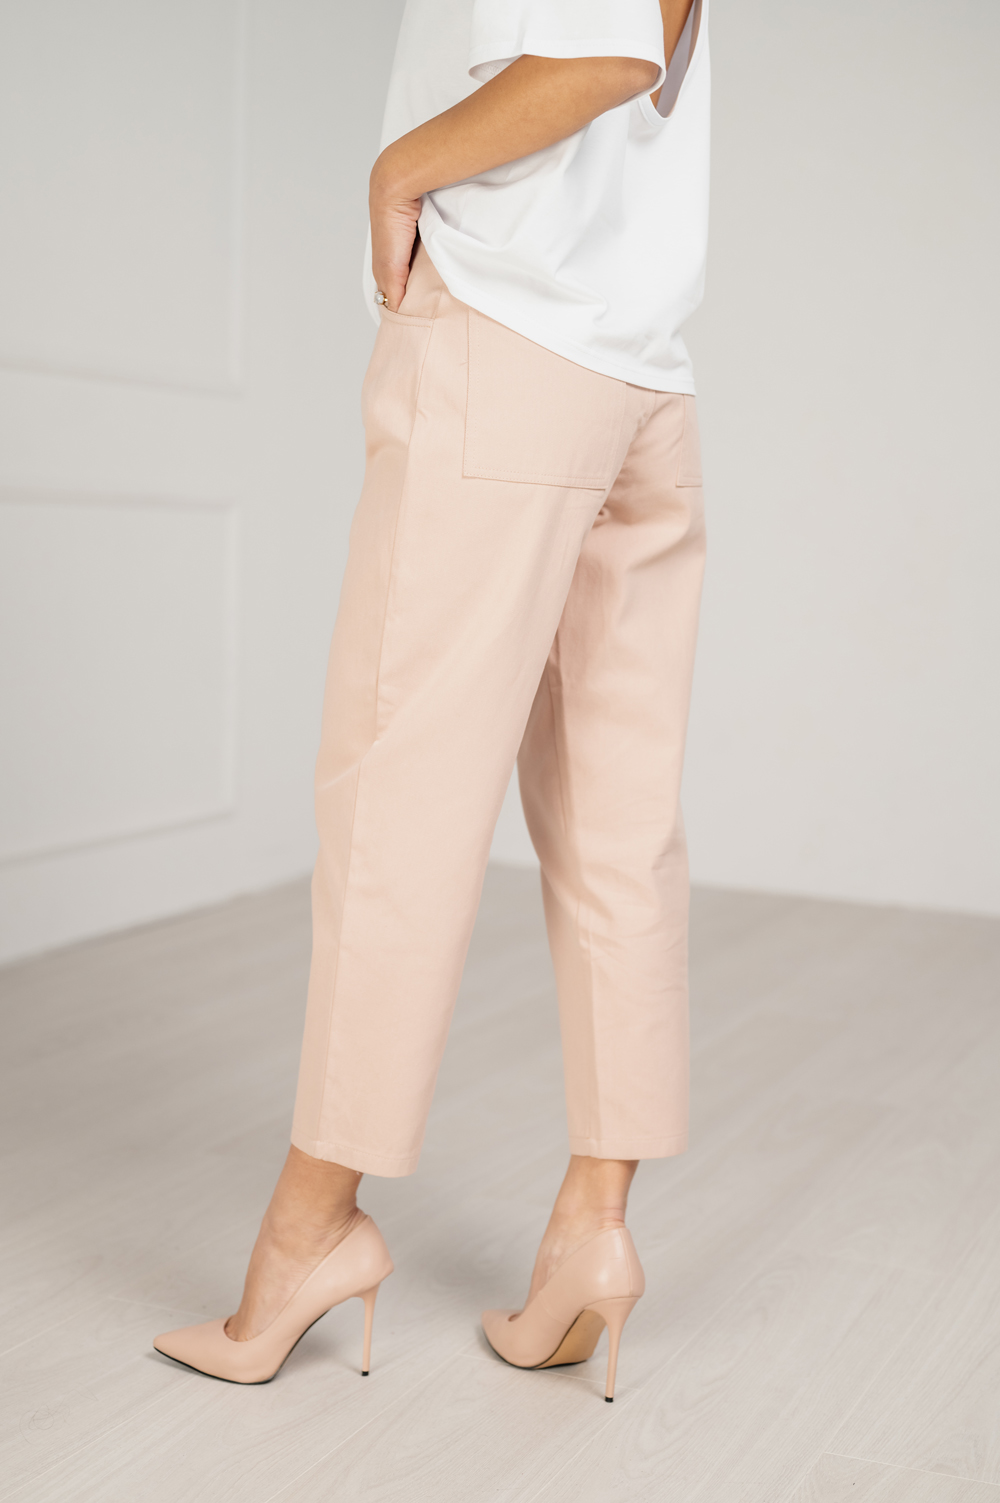 Powder colored slouchy jeans